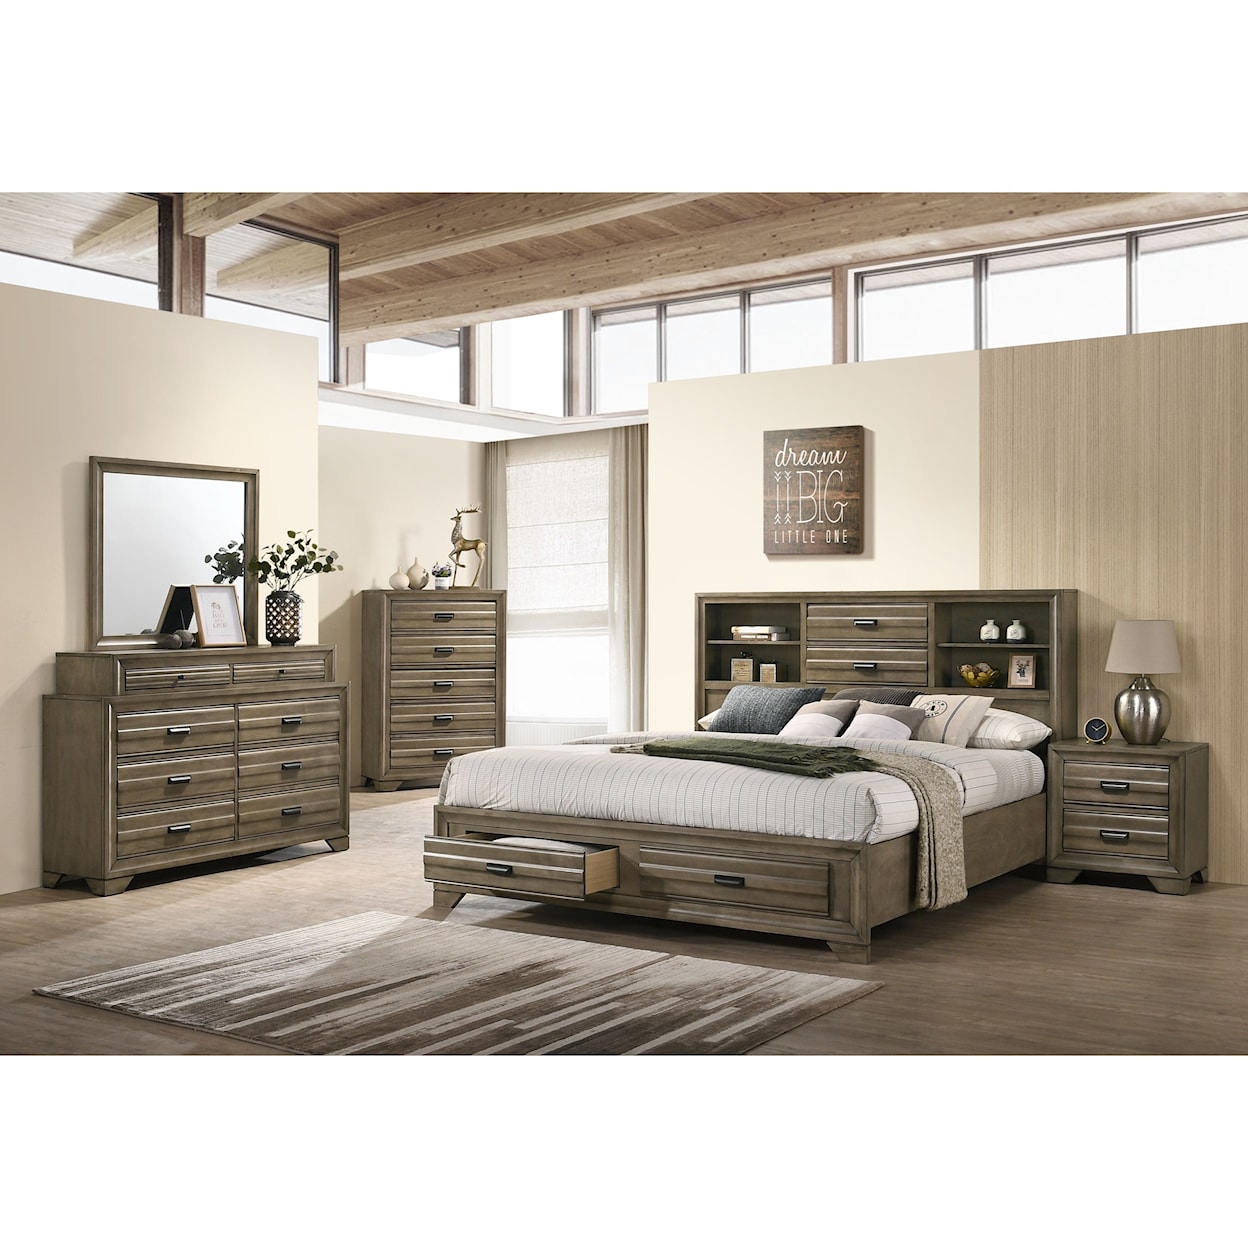 Lifestyle 5236A Queen Bedroom Group